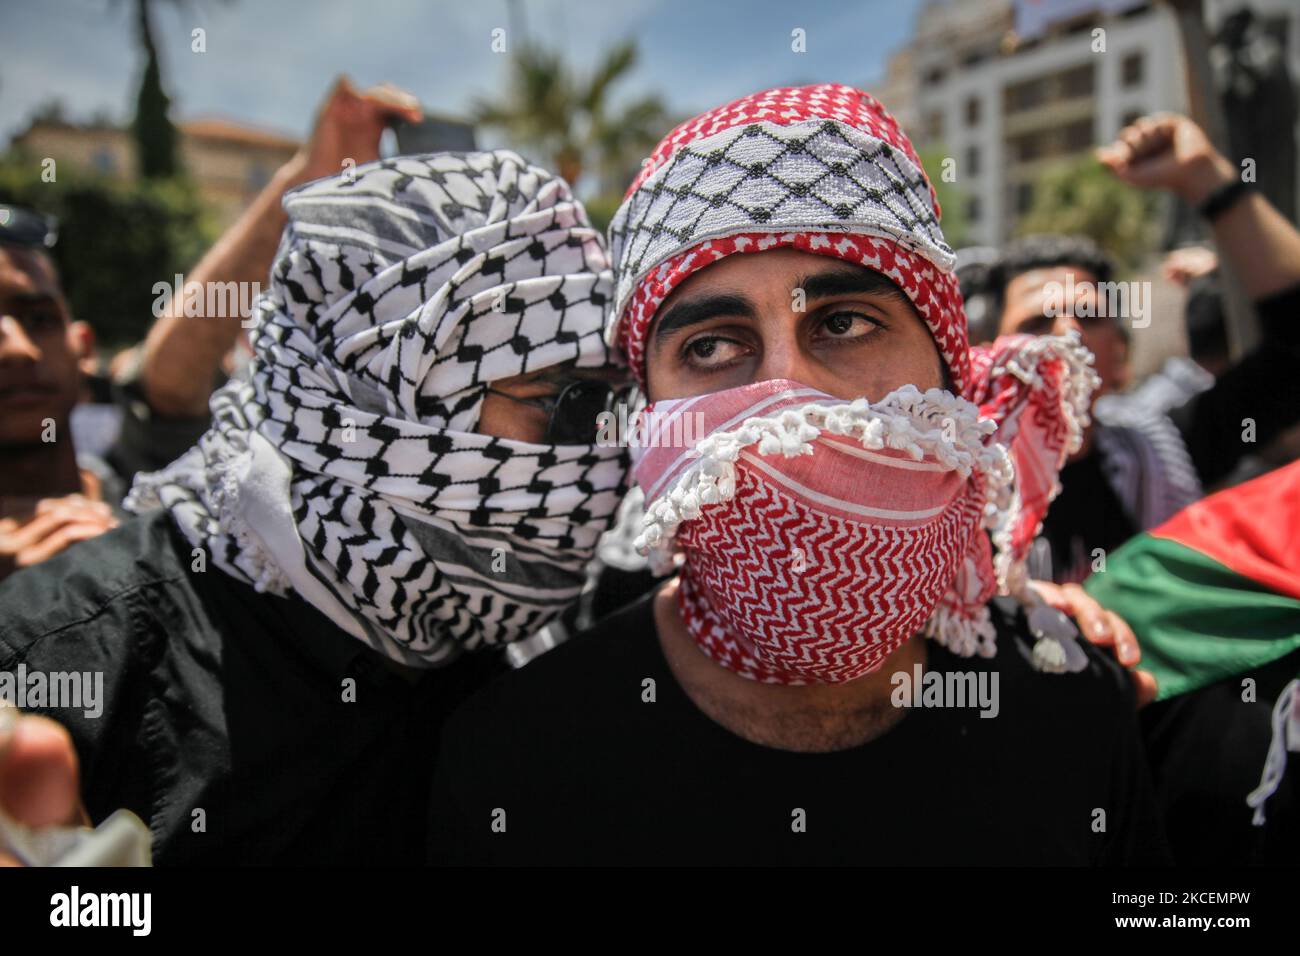 Protesters wearing the Palestinian keffiyeh attend a demonstration held by thousands of Tunisian an Palestinian demonstrators on avenue Habib Bourguiba in the capital Tunis, Tunisia, on May 15, 2021, in support with the Palestinian people and to protest against the Israel's air strikes on Gaza strip and against the Israeli violations in the occupied territories in Palestine, especially in the Palestinian neighborhood in East Jerusalem, Sheikh Jarrah. (Photo by Chedly Ben Ibrahim/NurPhoto) Stock Photo